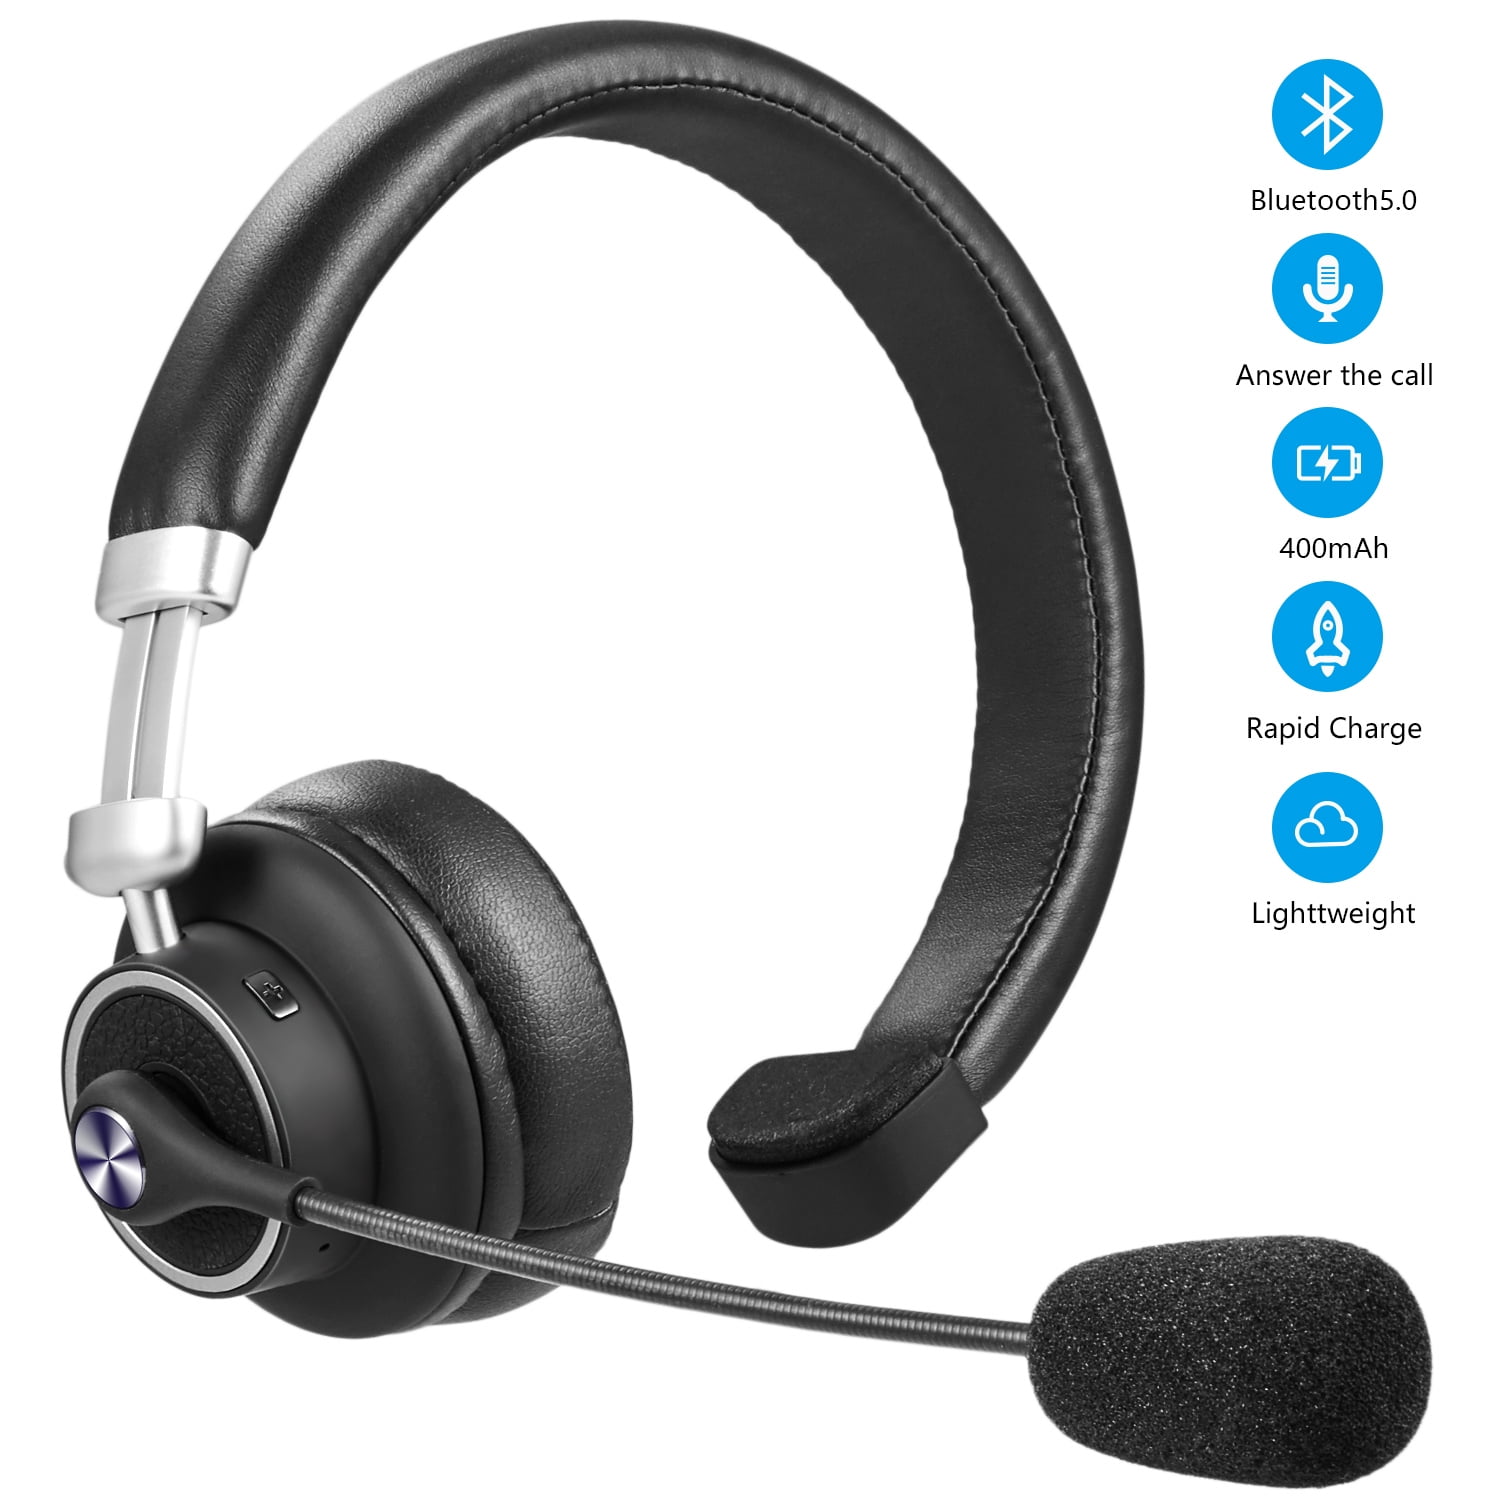 two bluetooth headsets for skype for laptop